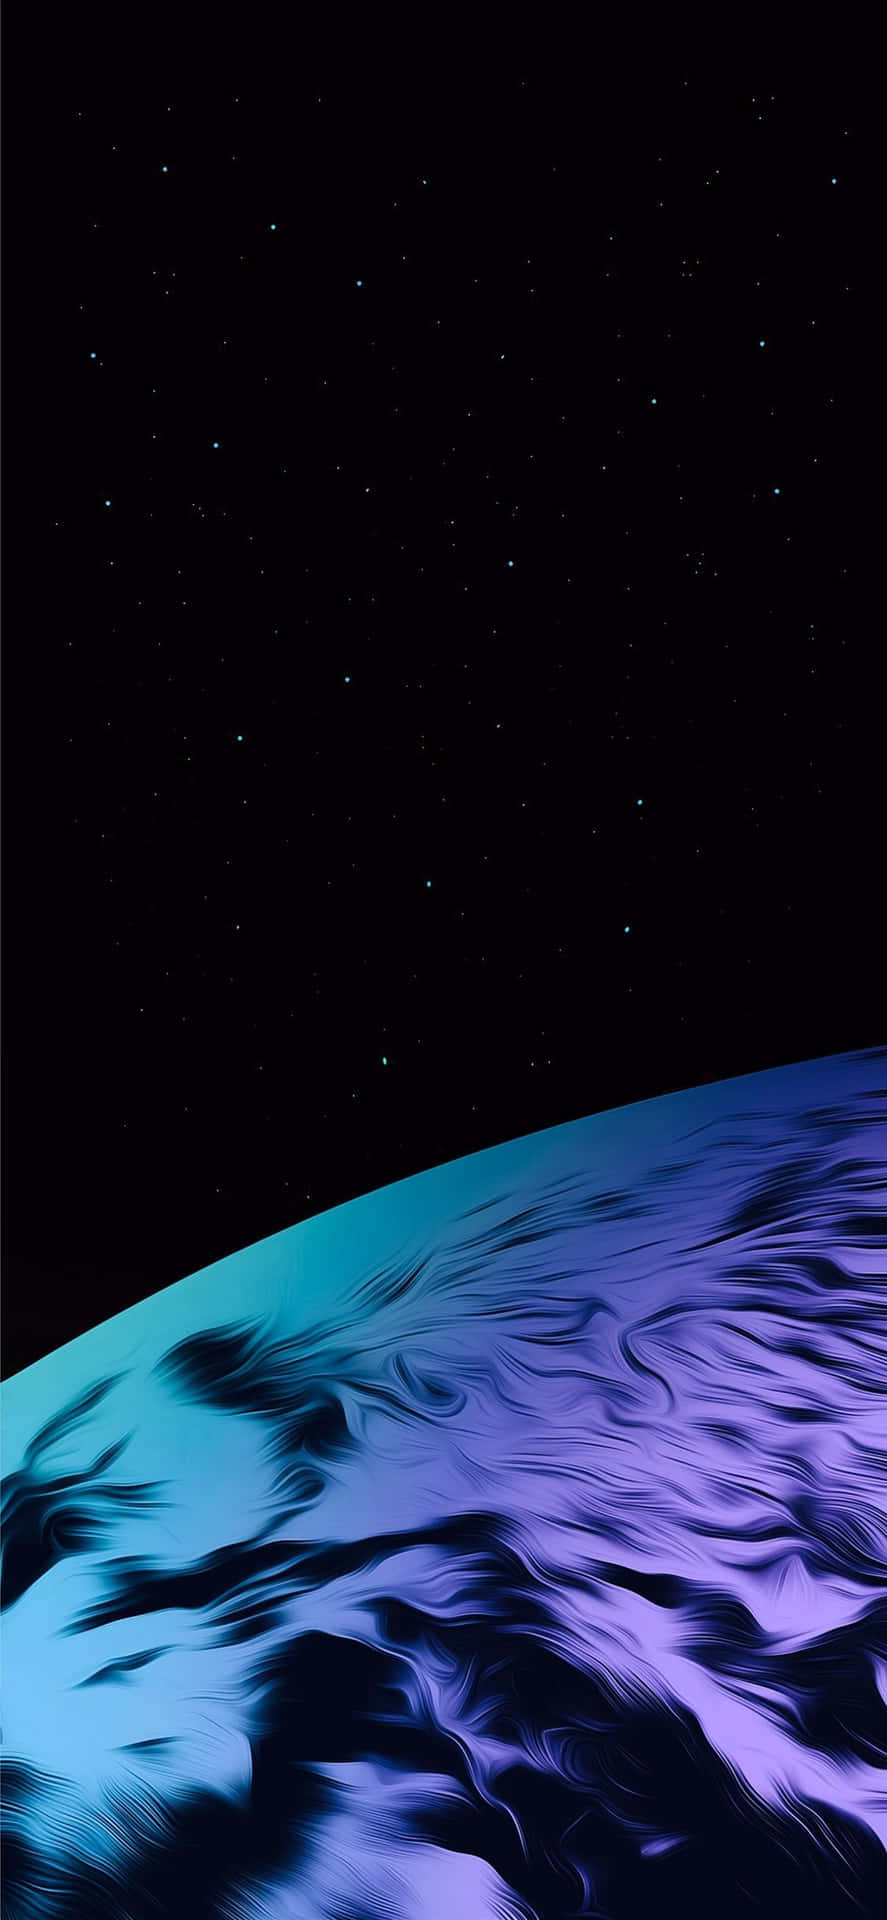 Experience a Colorful Visual Dance with Blue Amoled Wallpaper